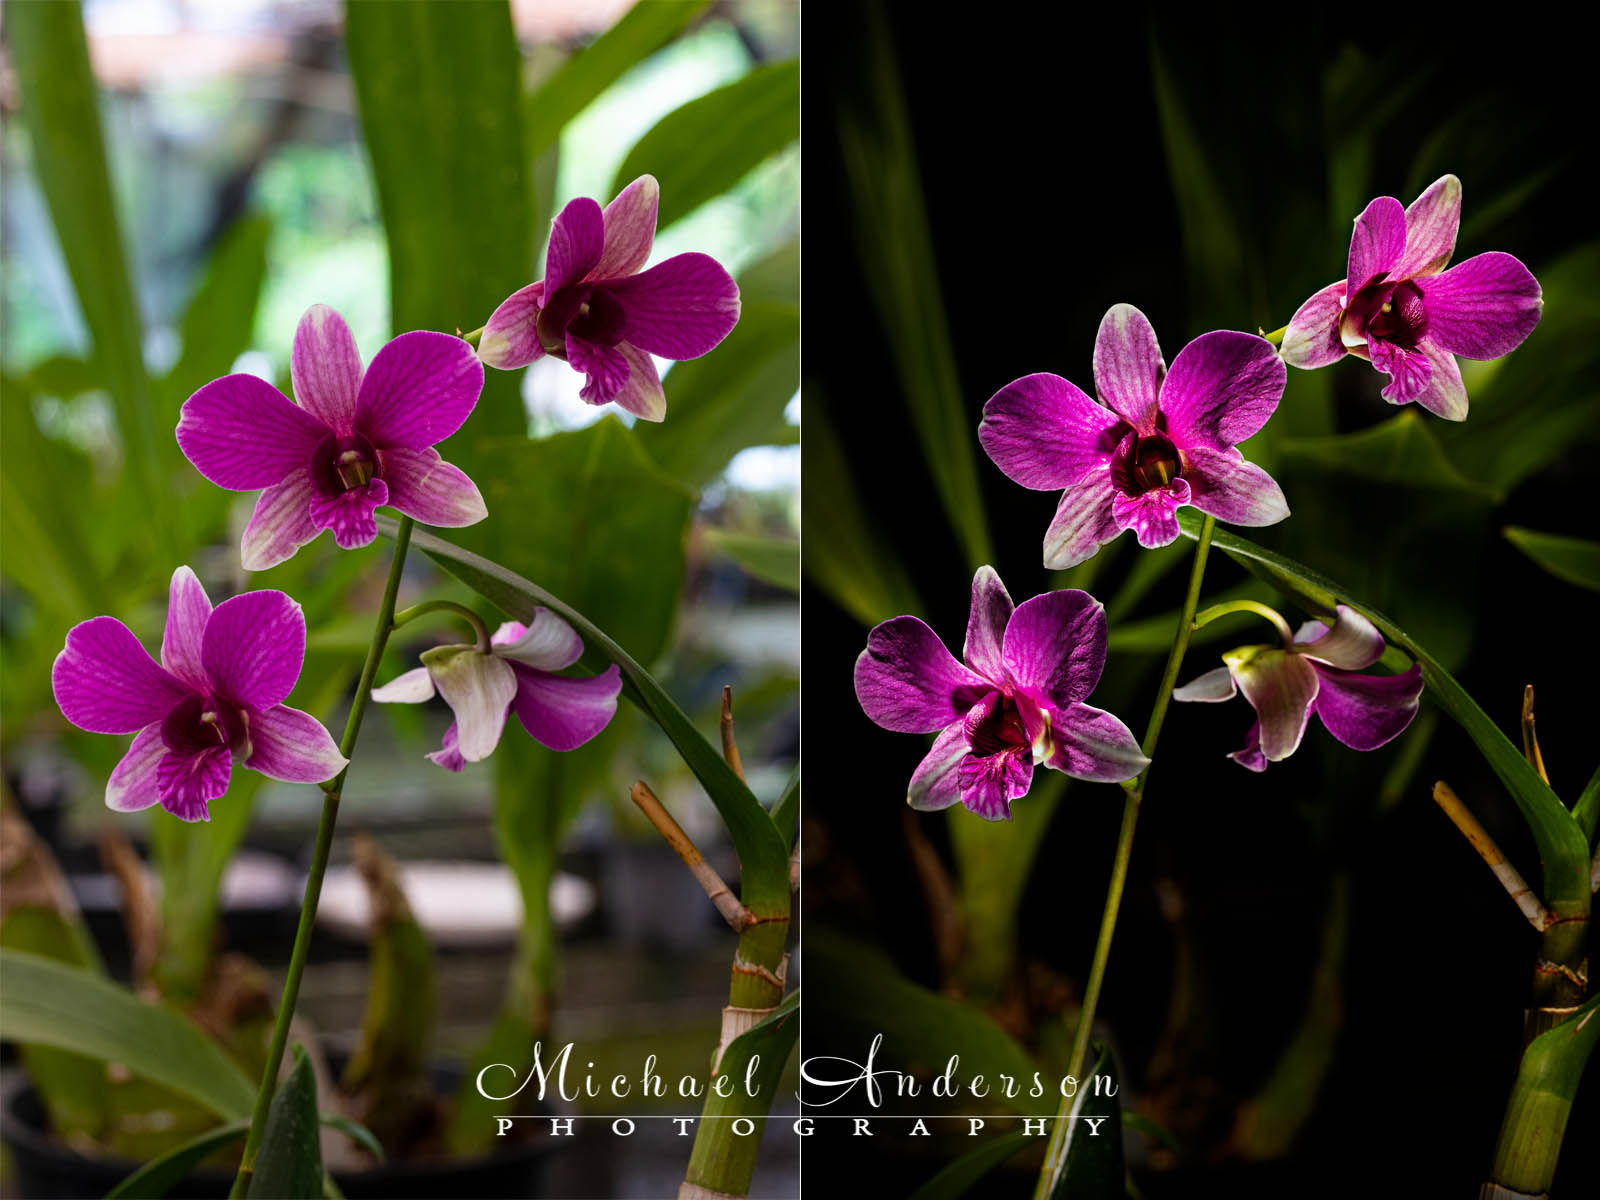 The before and after light painting photos of a Mangosteen Dendrobium Orchid.